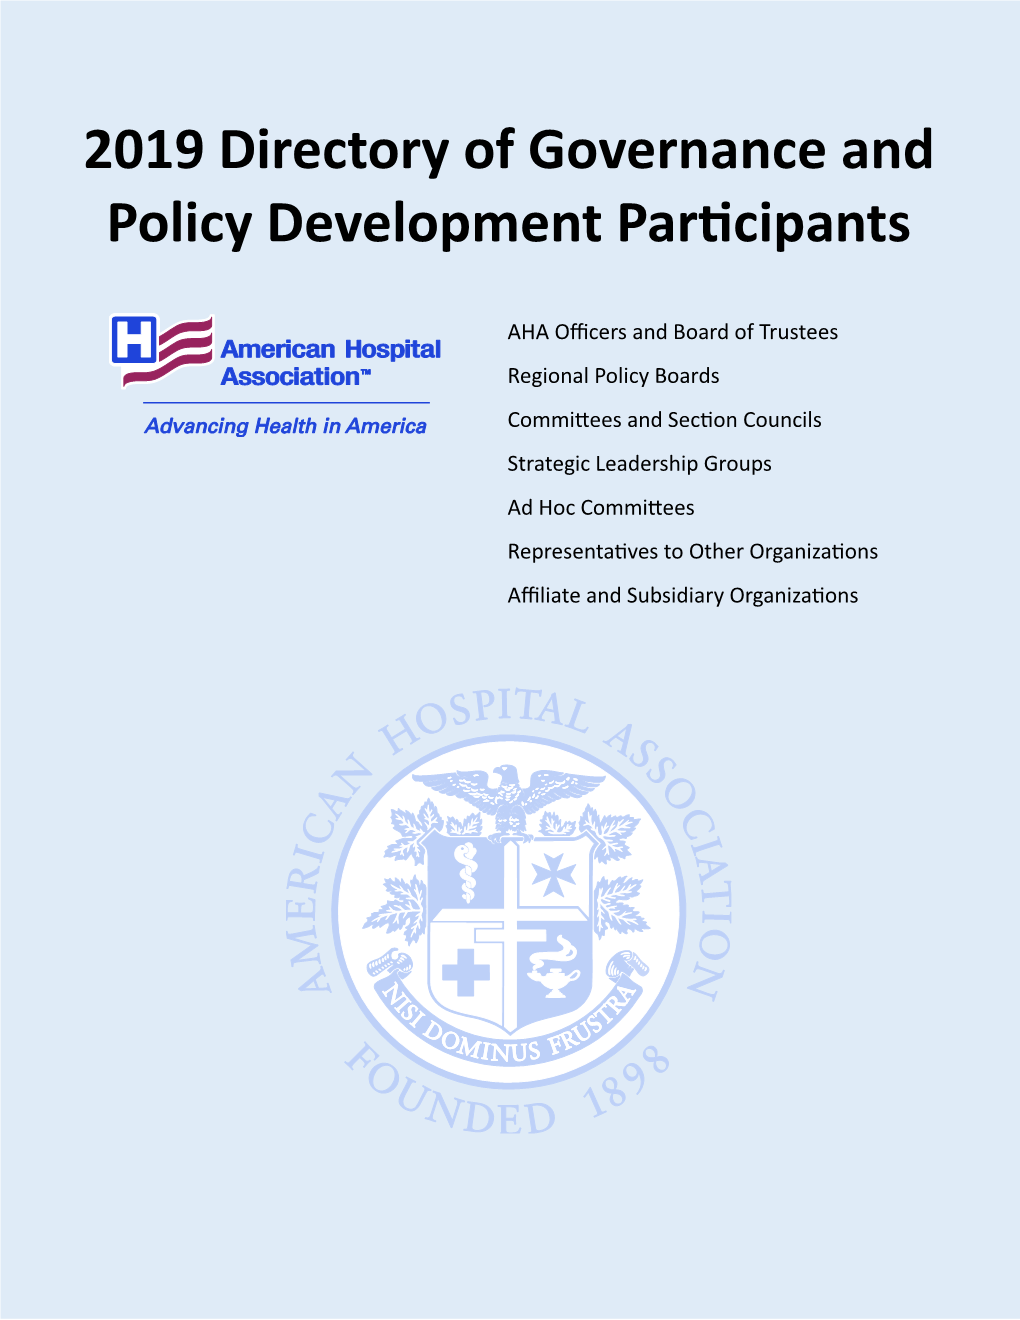 2019 Directory of Governance and Policy Development Participants